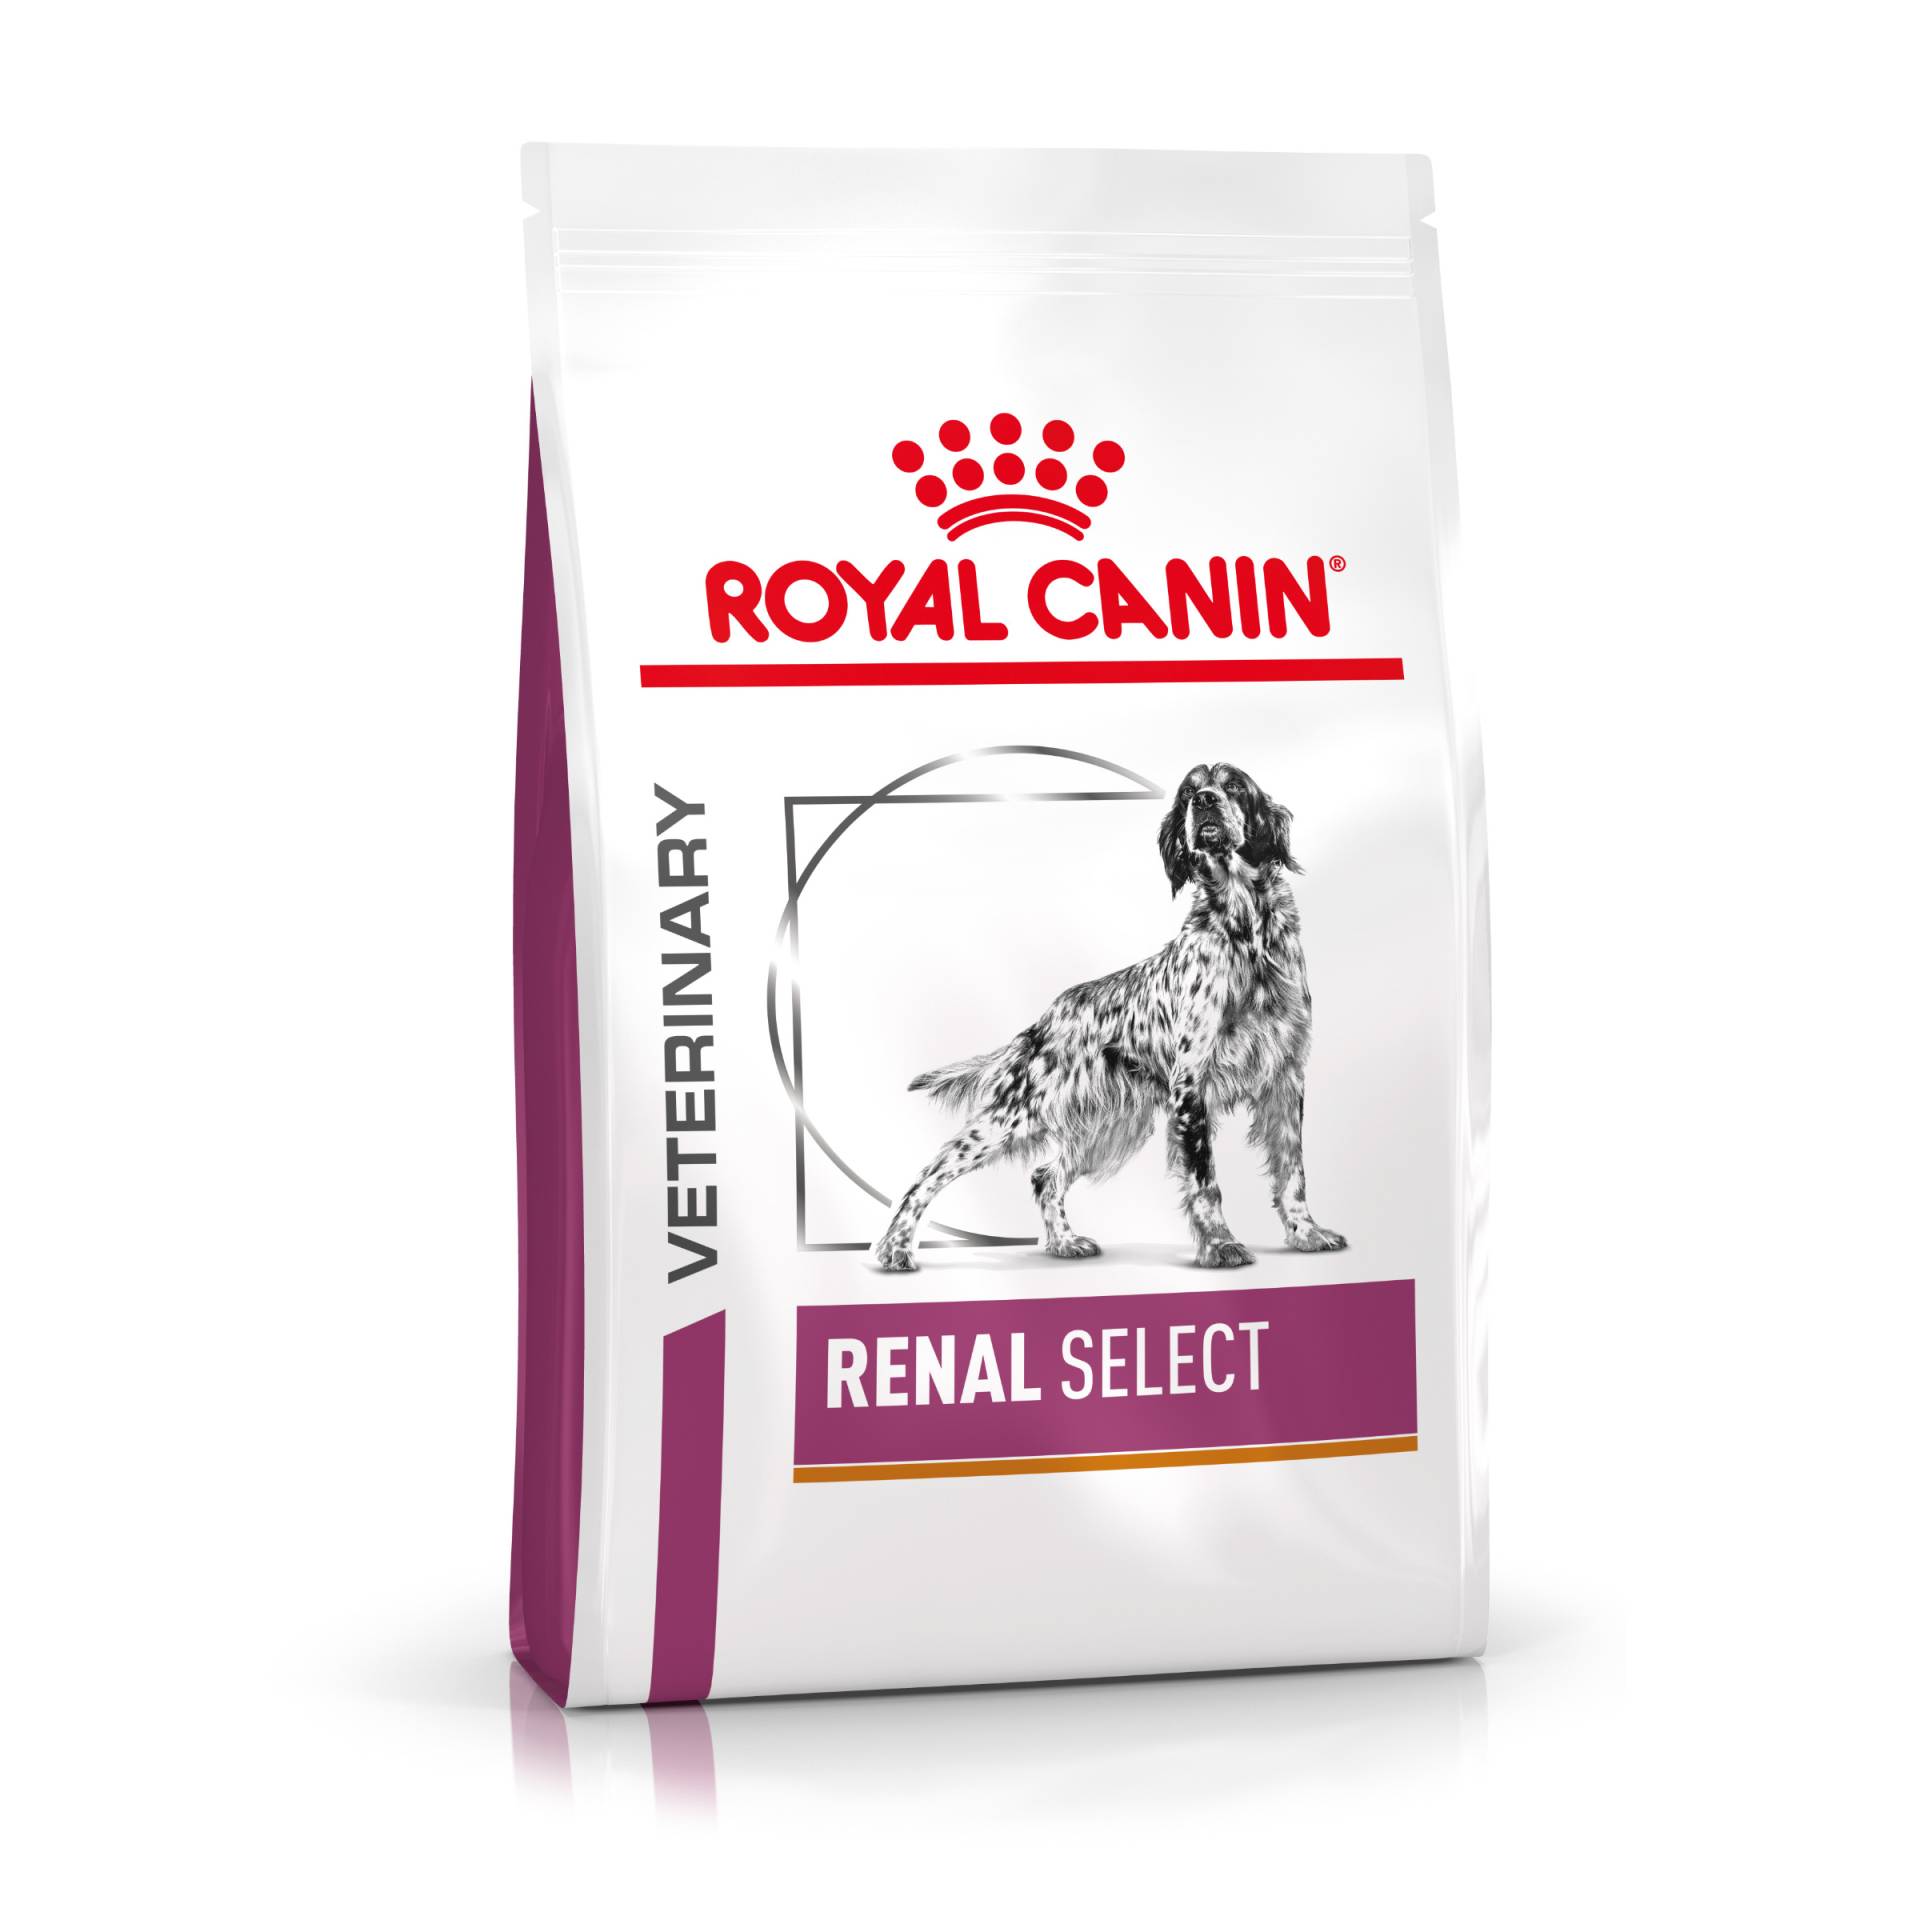 Royal Canin Veterinary Canine Renal Select - 10 kg von Royal Canin Veterinary Diet